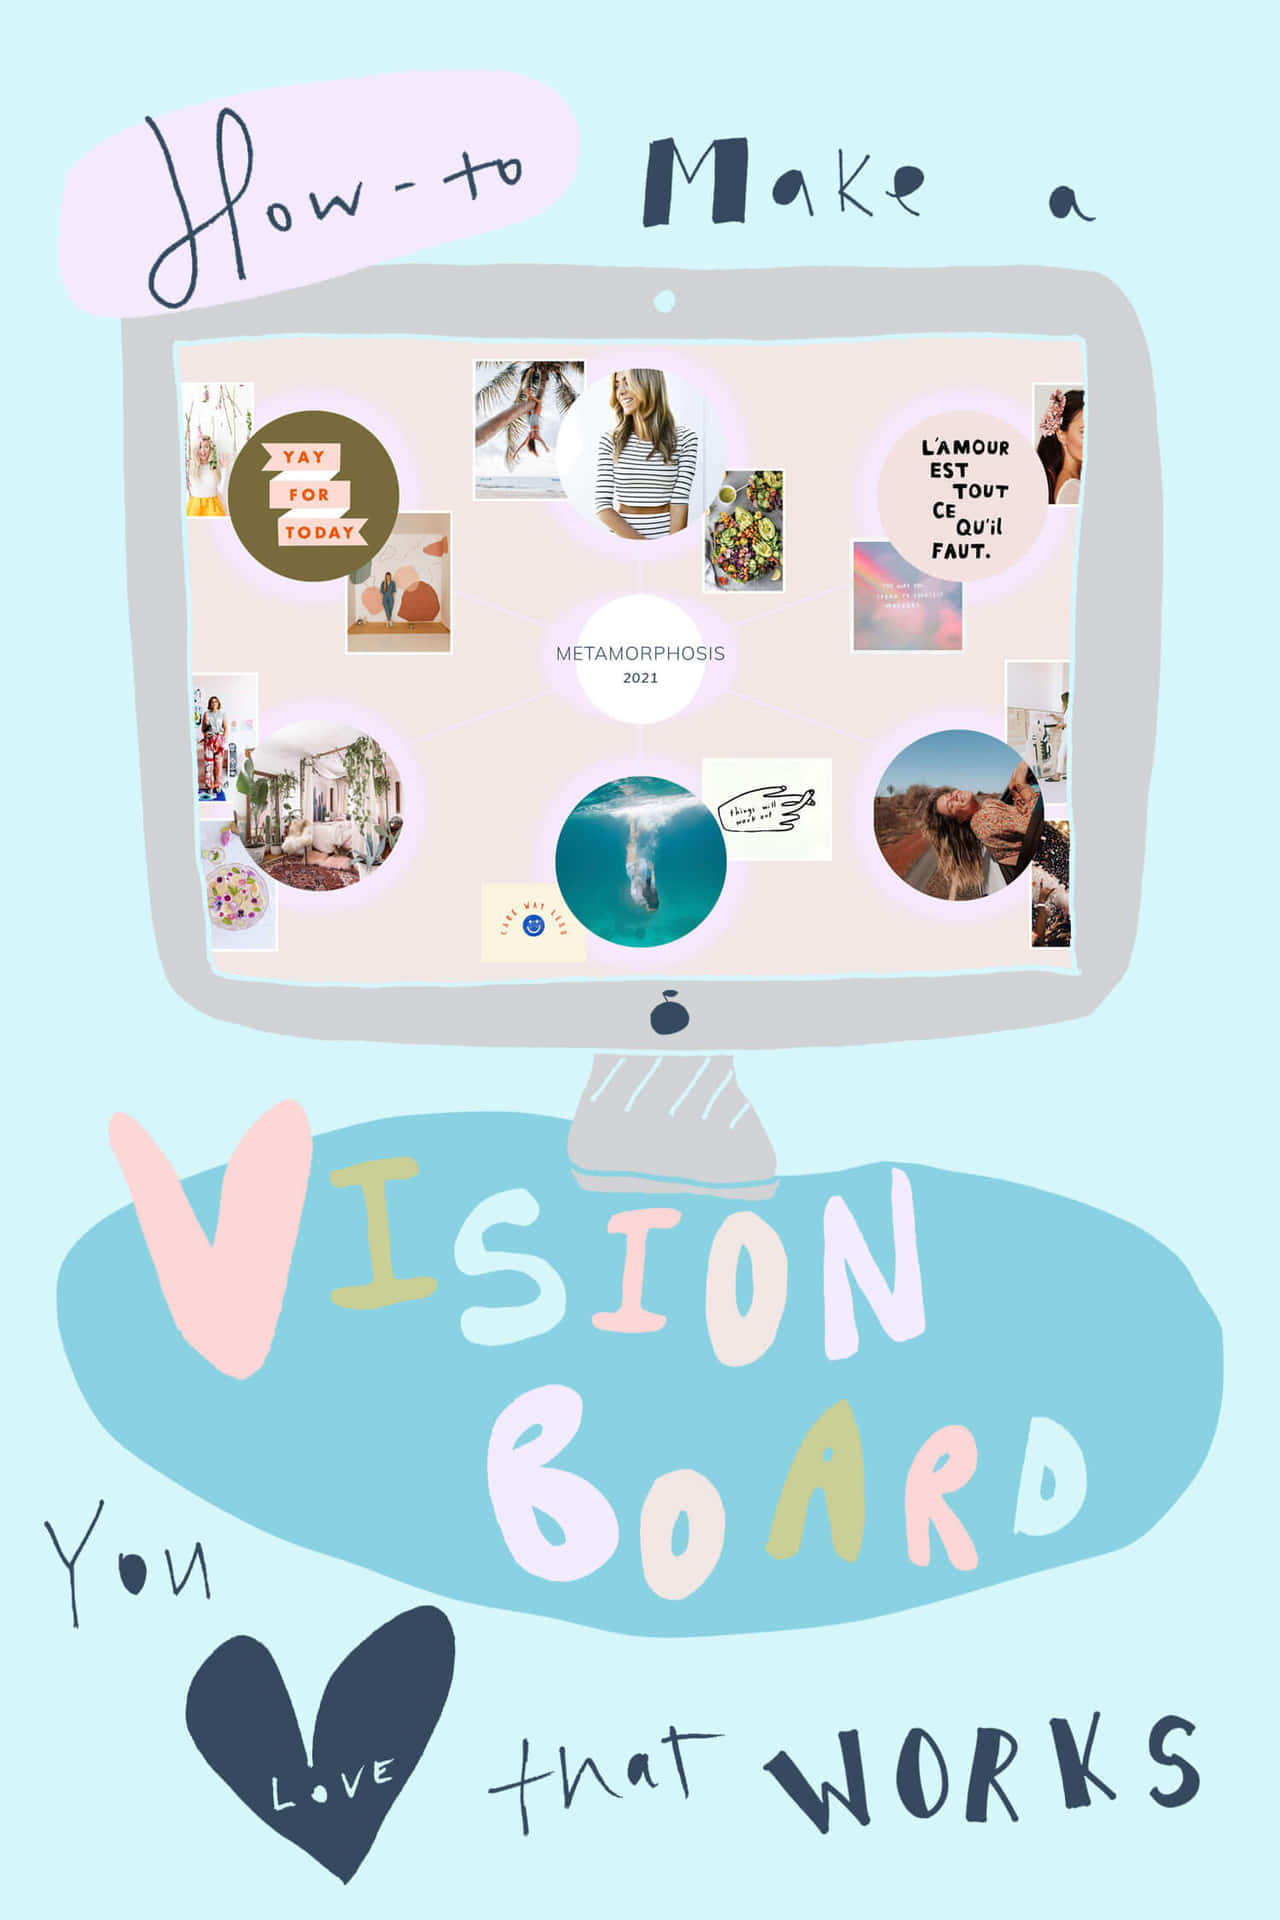 Download Vision Board Pictures | Wallpapers.com